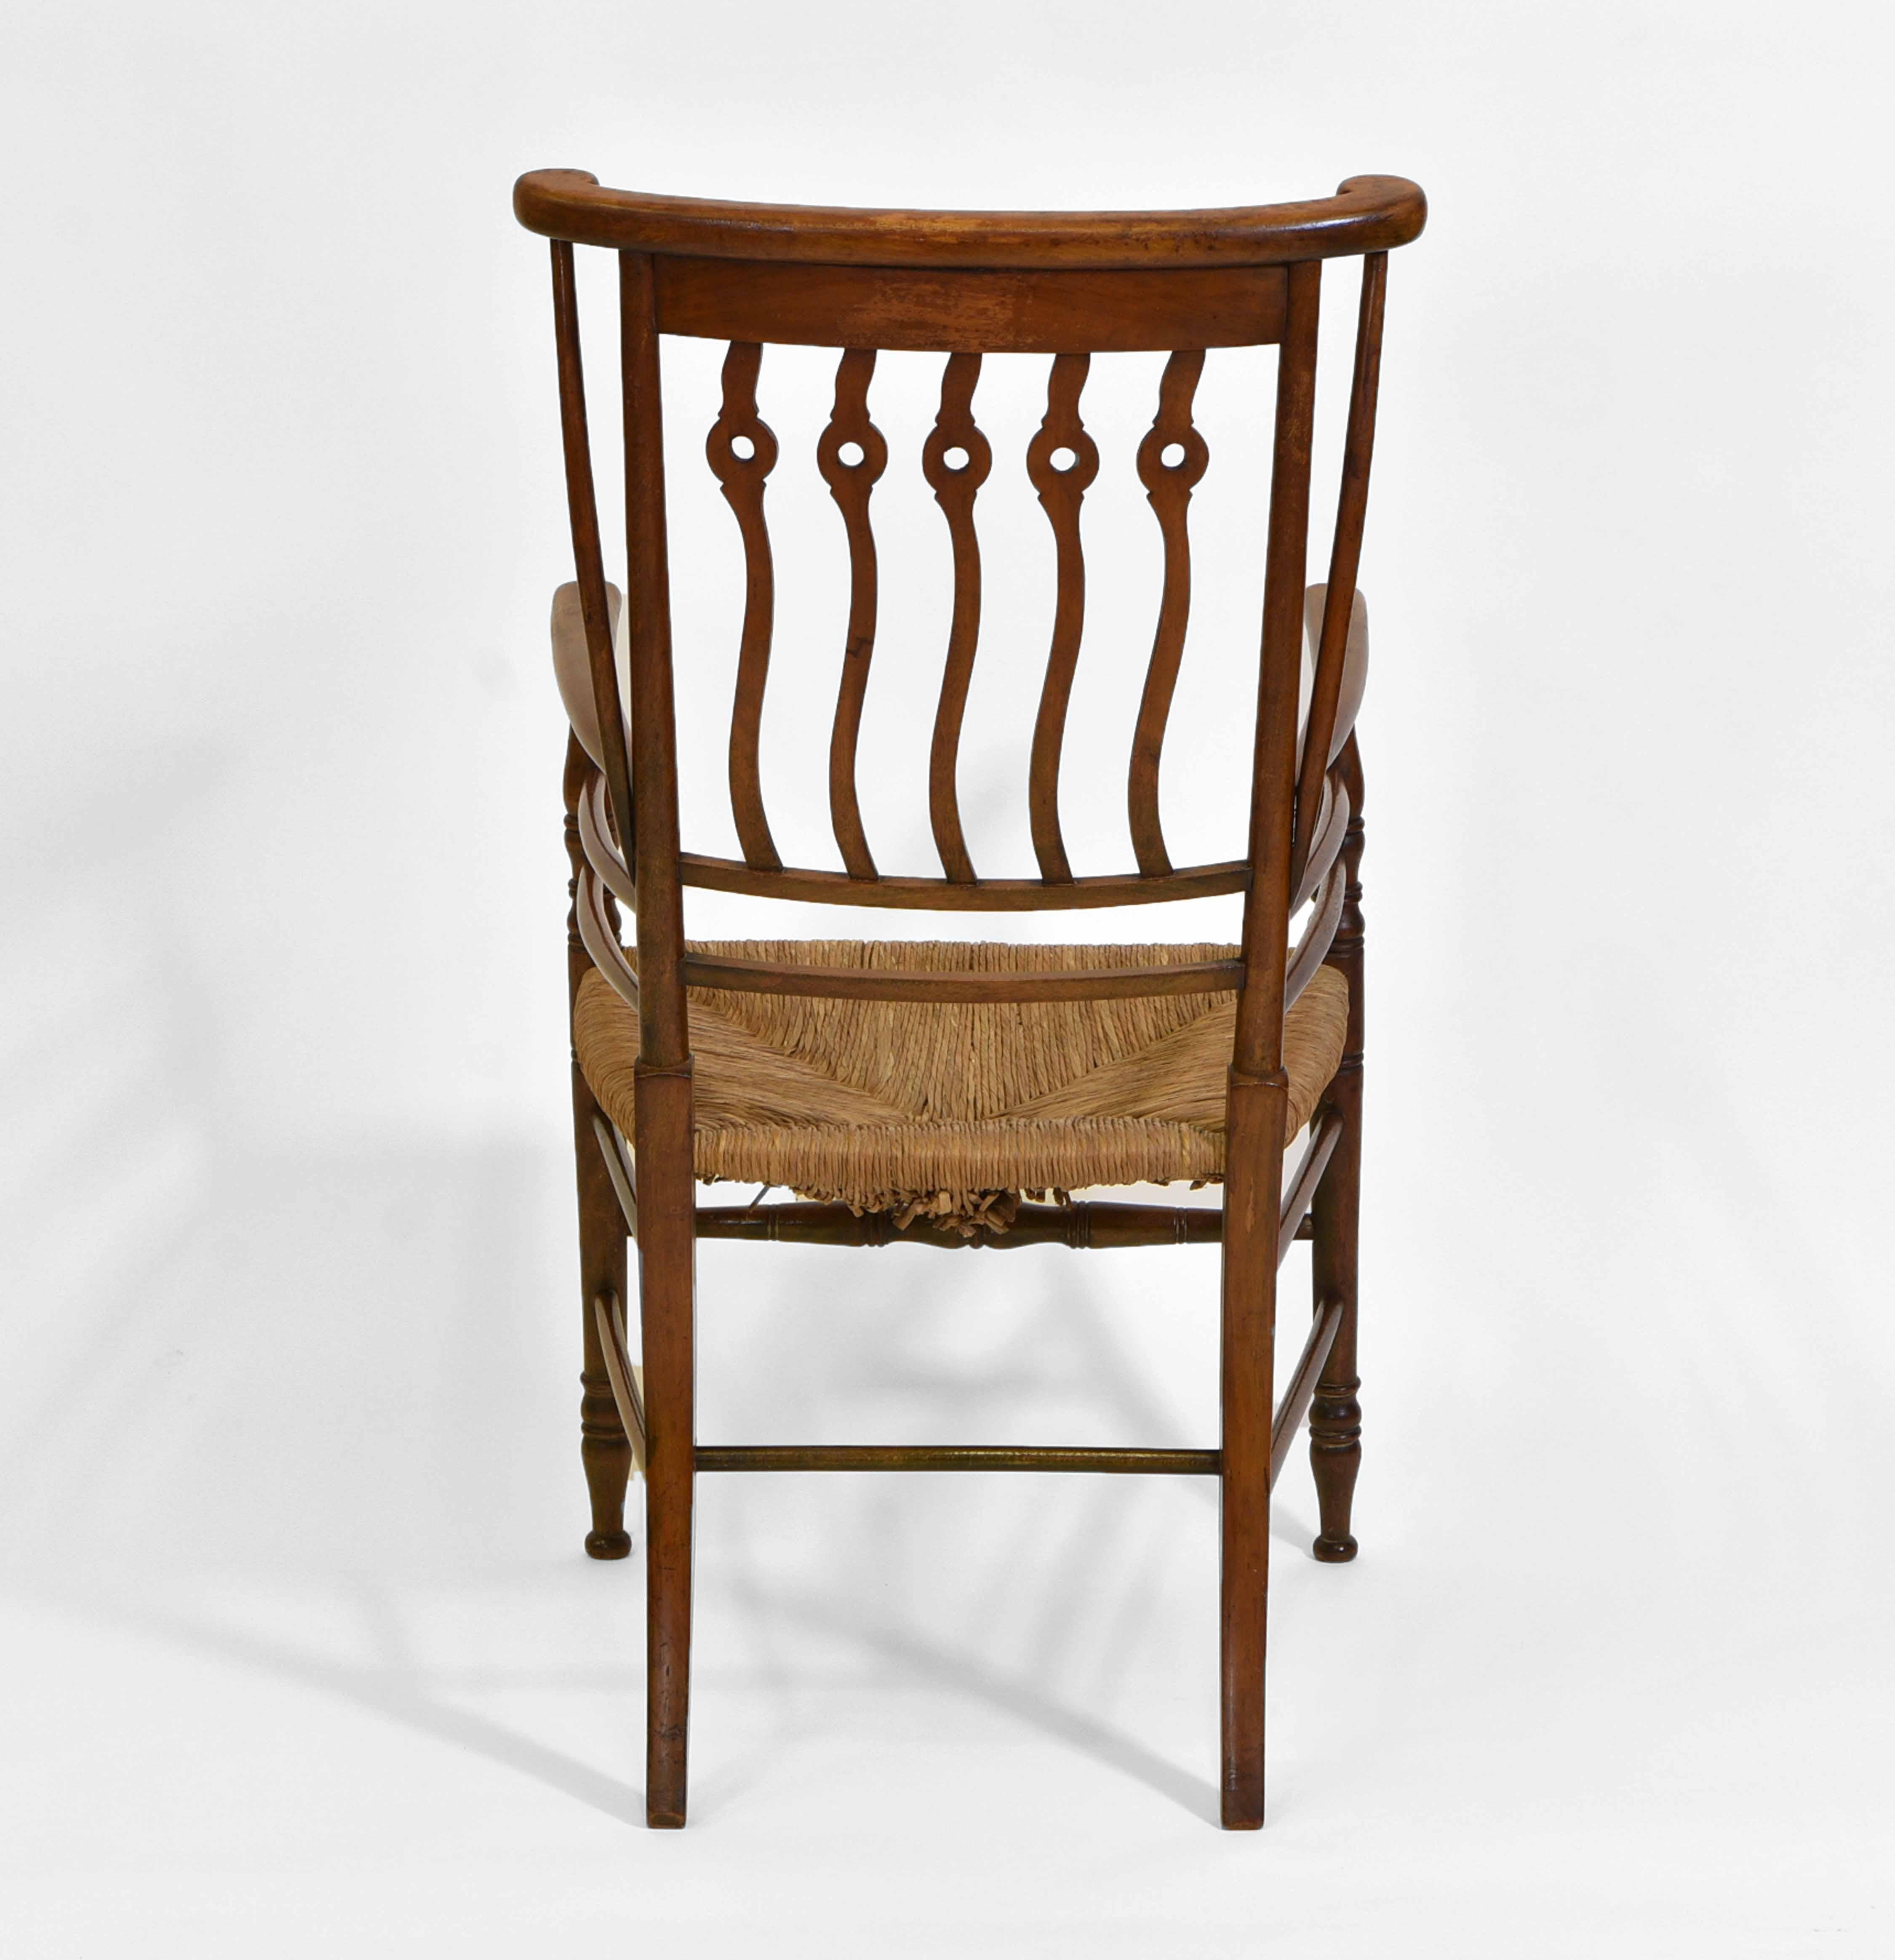 20th Century English Arts & Crafts “Quaint” Rush Seated Armchair For Sale